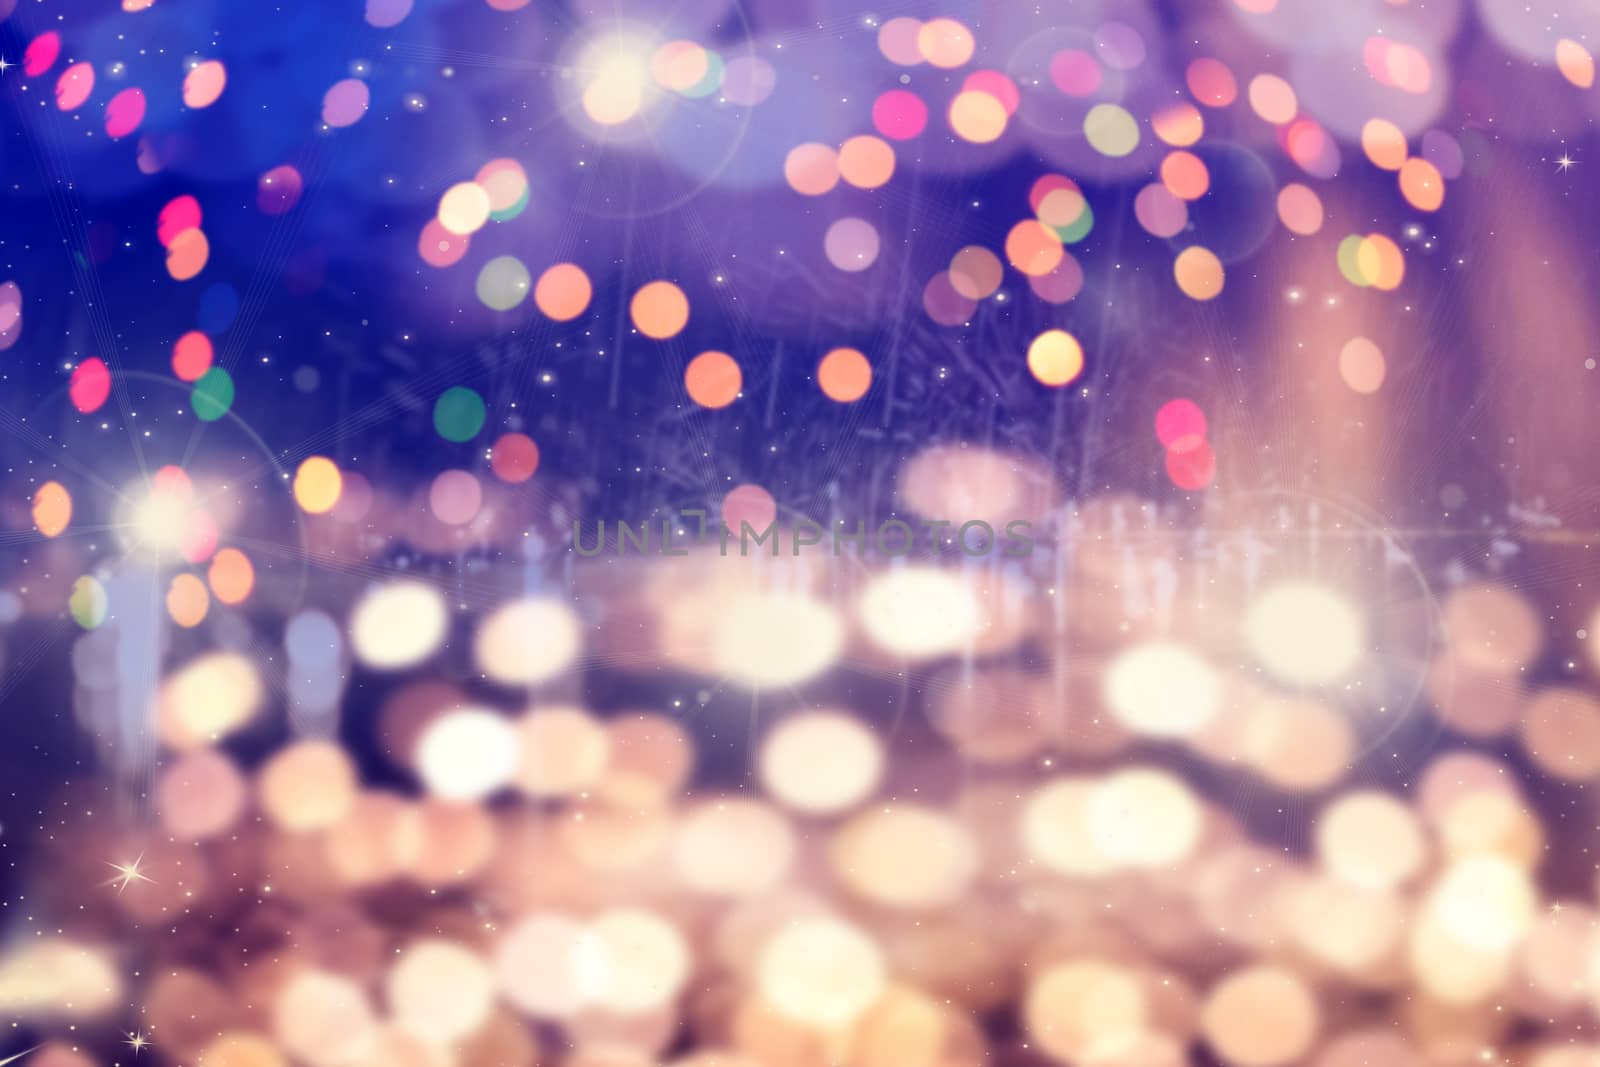 magic holiday background with blurred bokeh of Christmas lihjts by melis